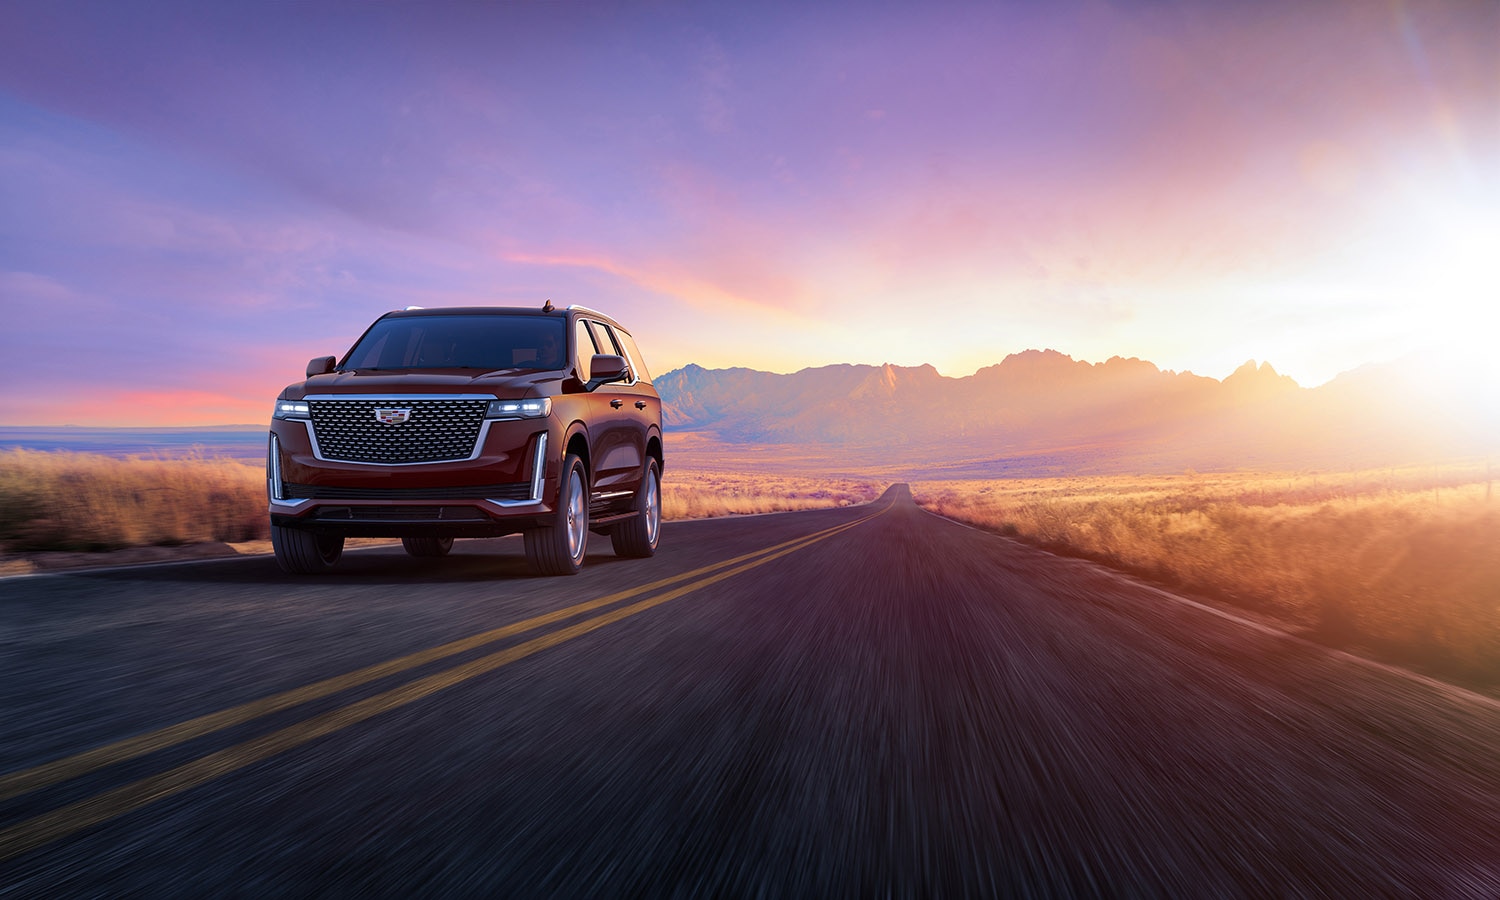 Cadillac Escalade in dark red driving on paved road with sunlight and mountains in the background